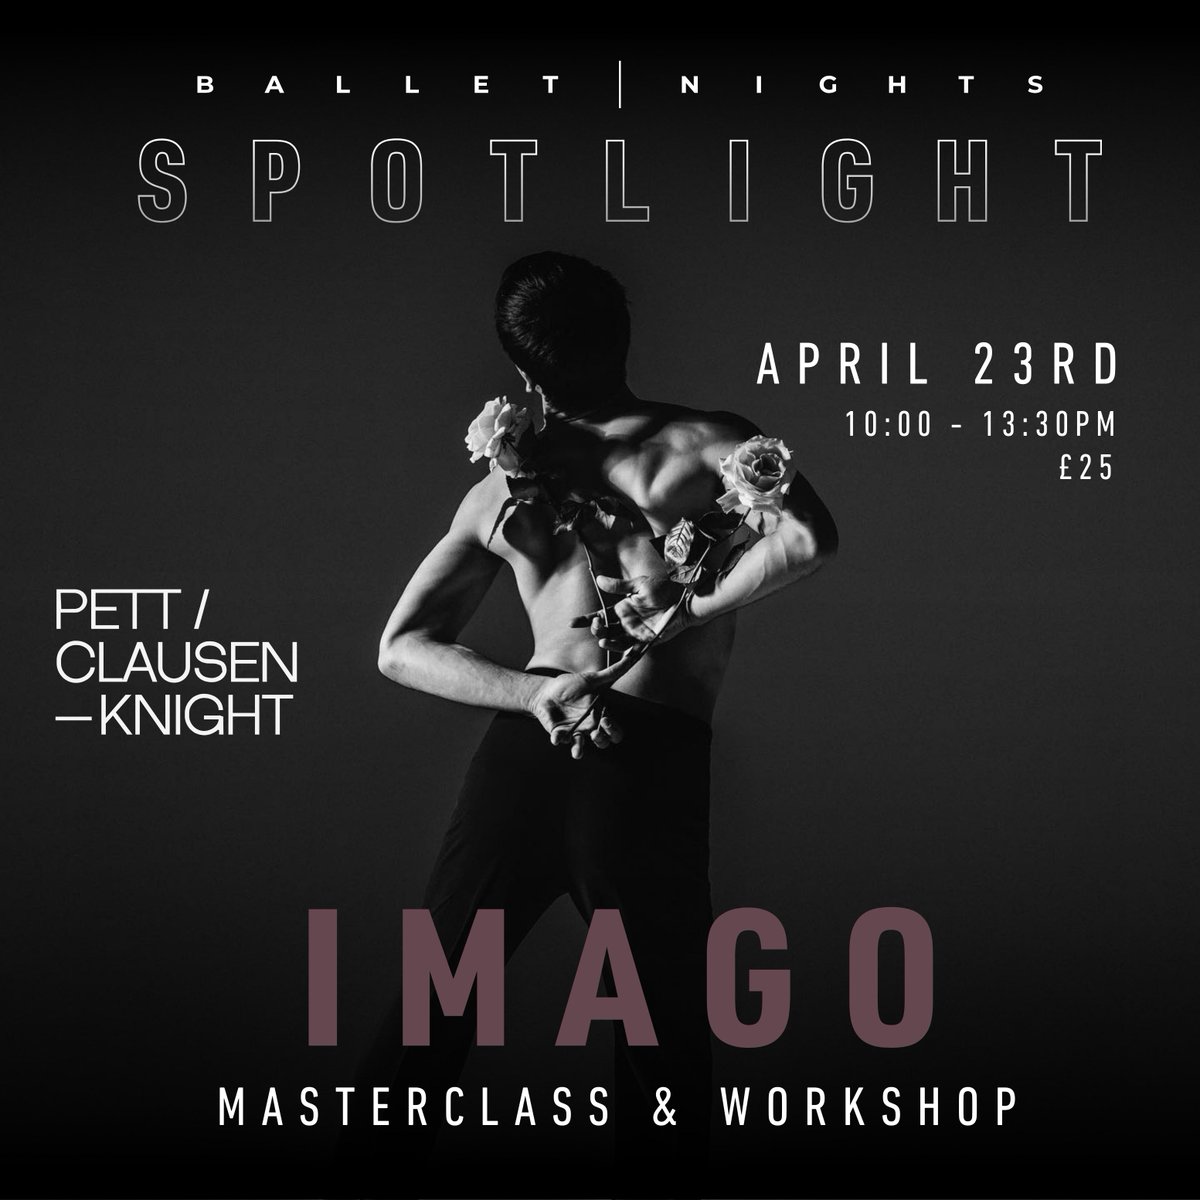 💐 Experience Pett | Clausen - Knight’s IMAGO up close, ahead of the UK Premiere, with Class and Workshop taught by the choreographers themselves right here on the Ballet Nights Stage... 👉Tuesday 23rd April... 🔗 Book Now at eventbrite.co.uk/e/pettclausen-…